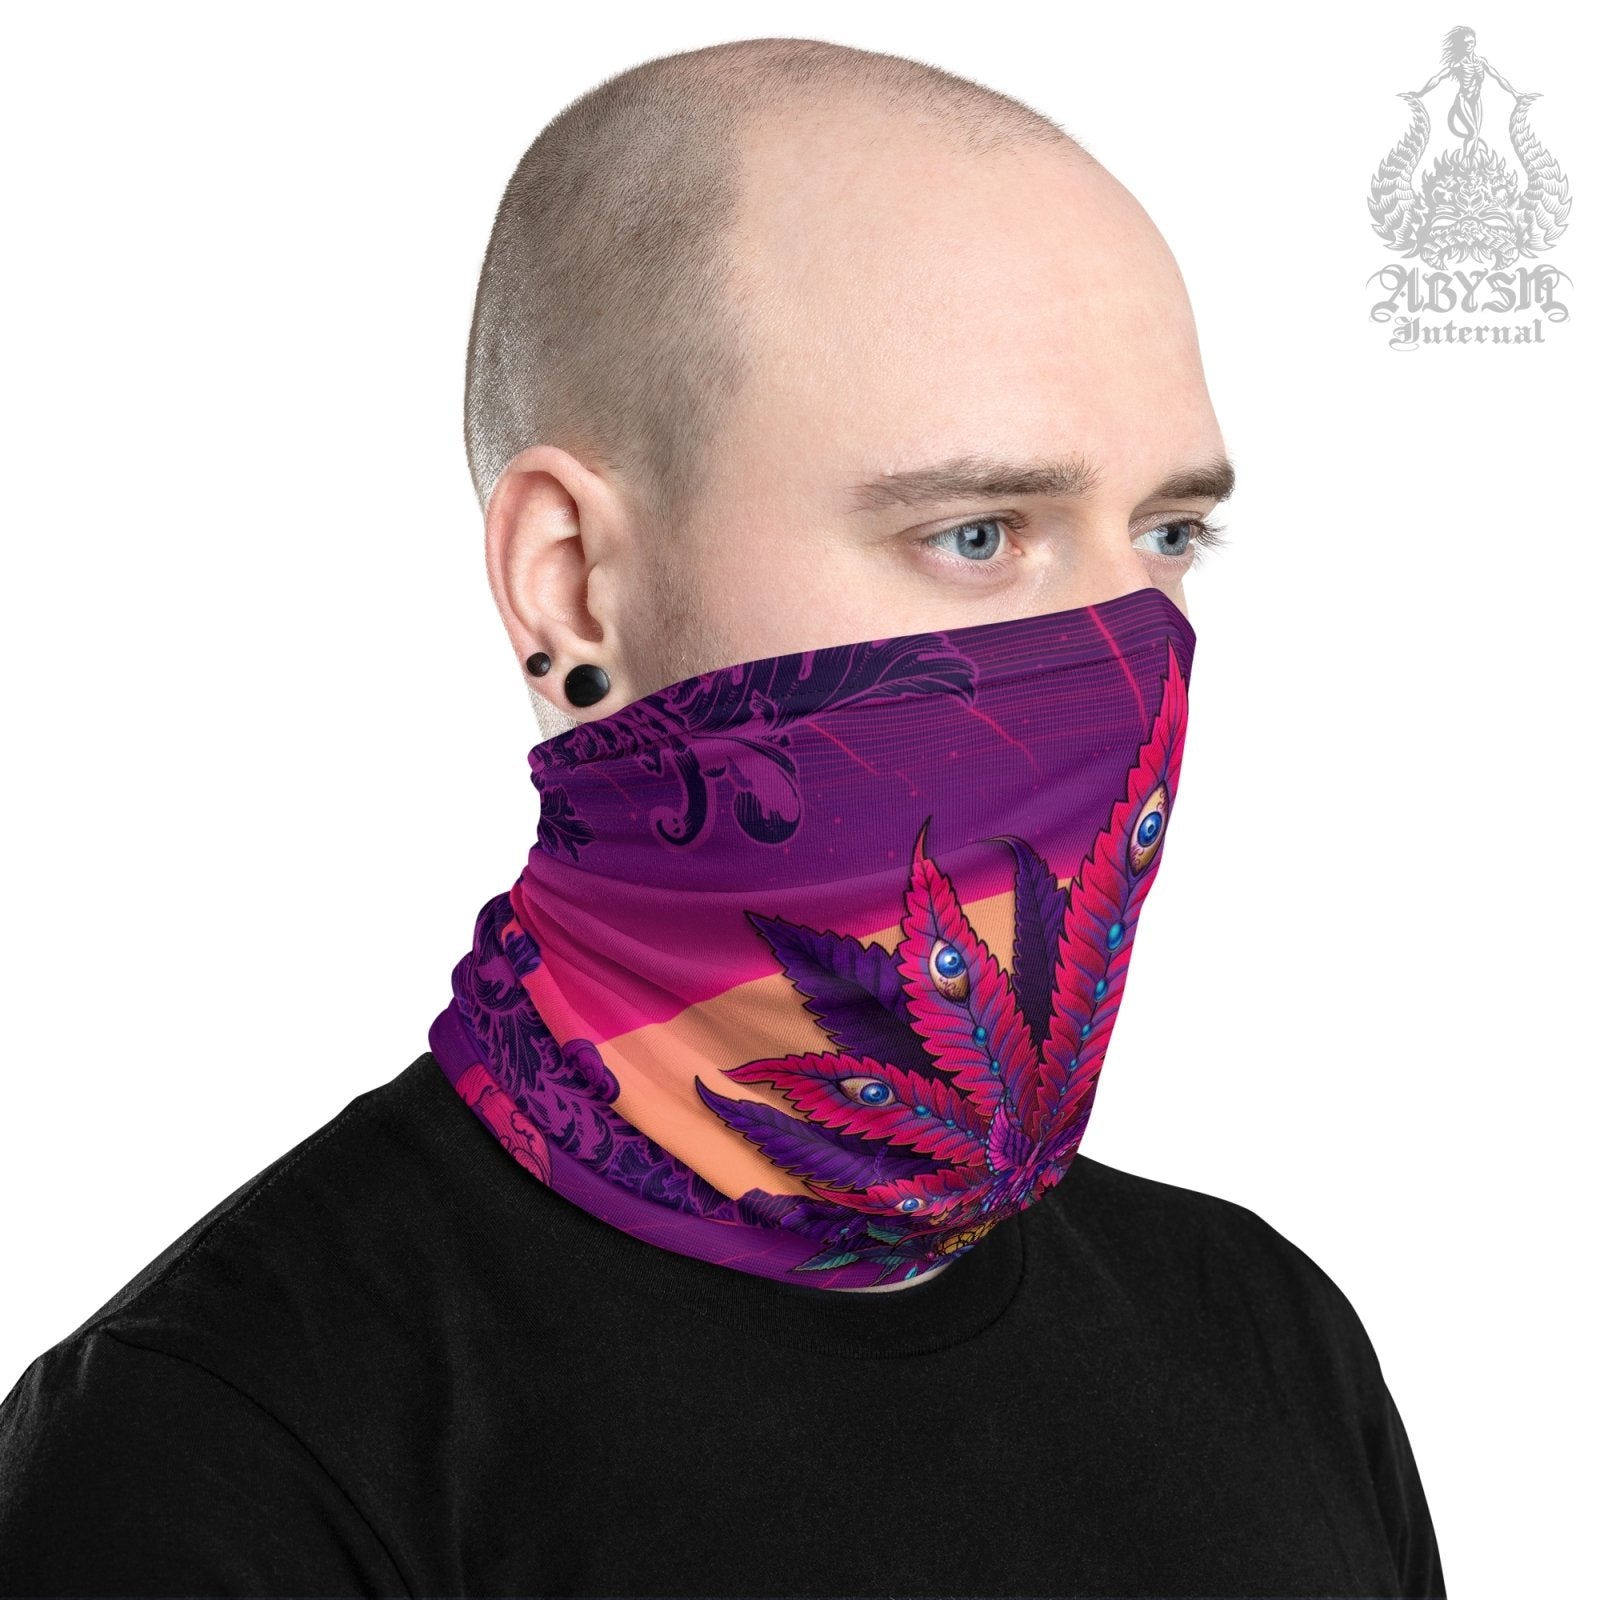 Cannabis Neck Gaiter, Weed Face Mask, Synthwave Head Covering, Psychedelic Vaporwave 80s Retrowave, Festival Outfit, 420 Gift - Marijuana - Abysm Internal